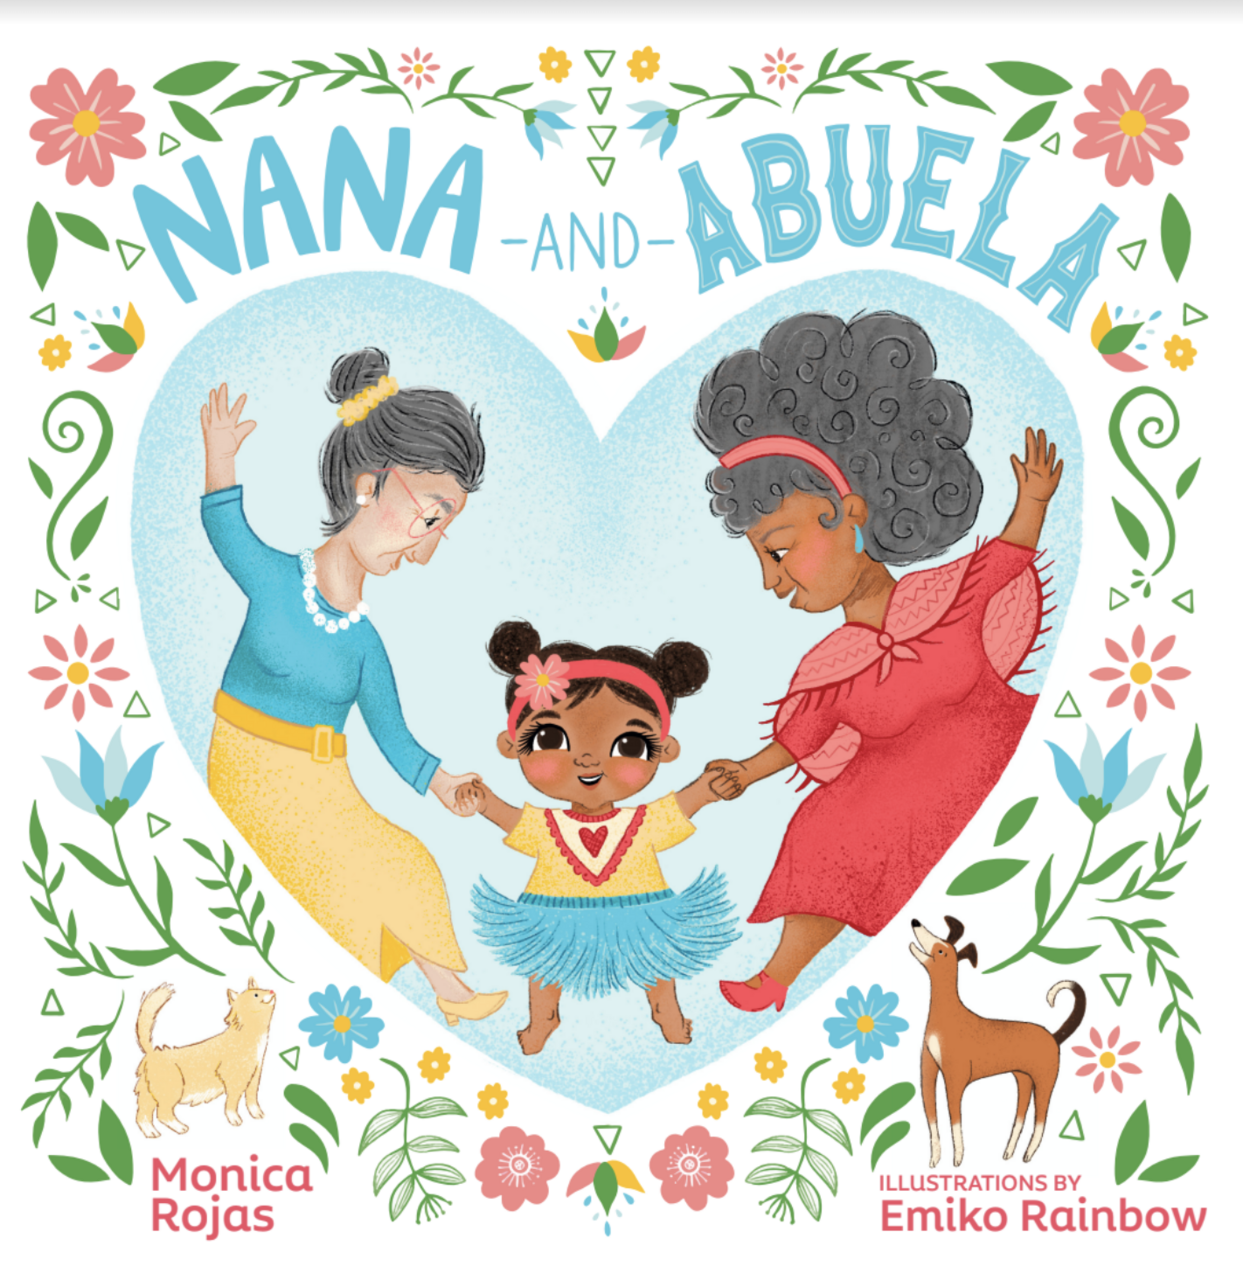 An image of a book cover, depicting a biracial child with her two grandmothers.